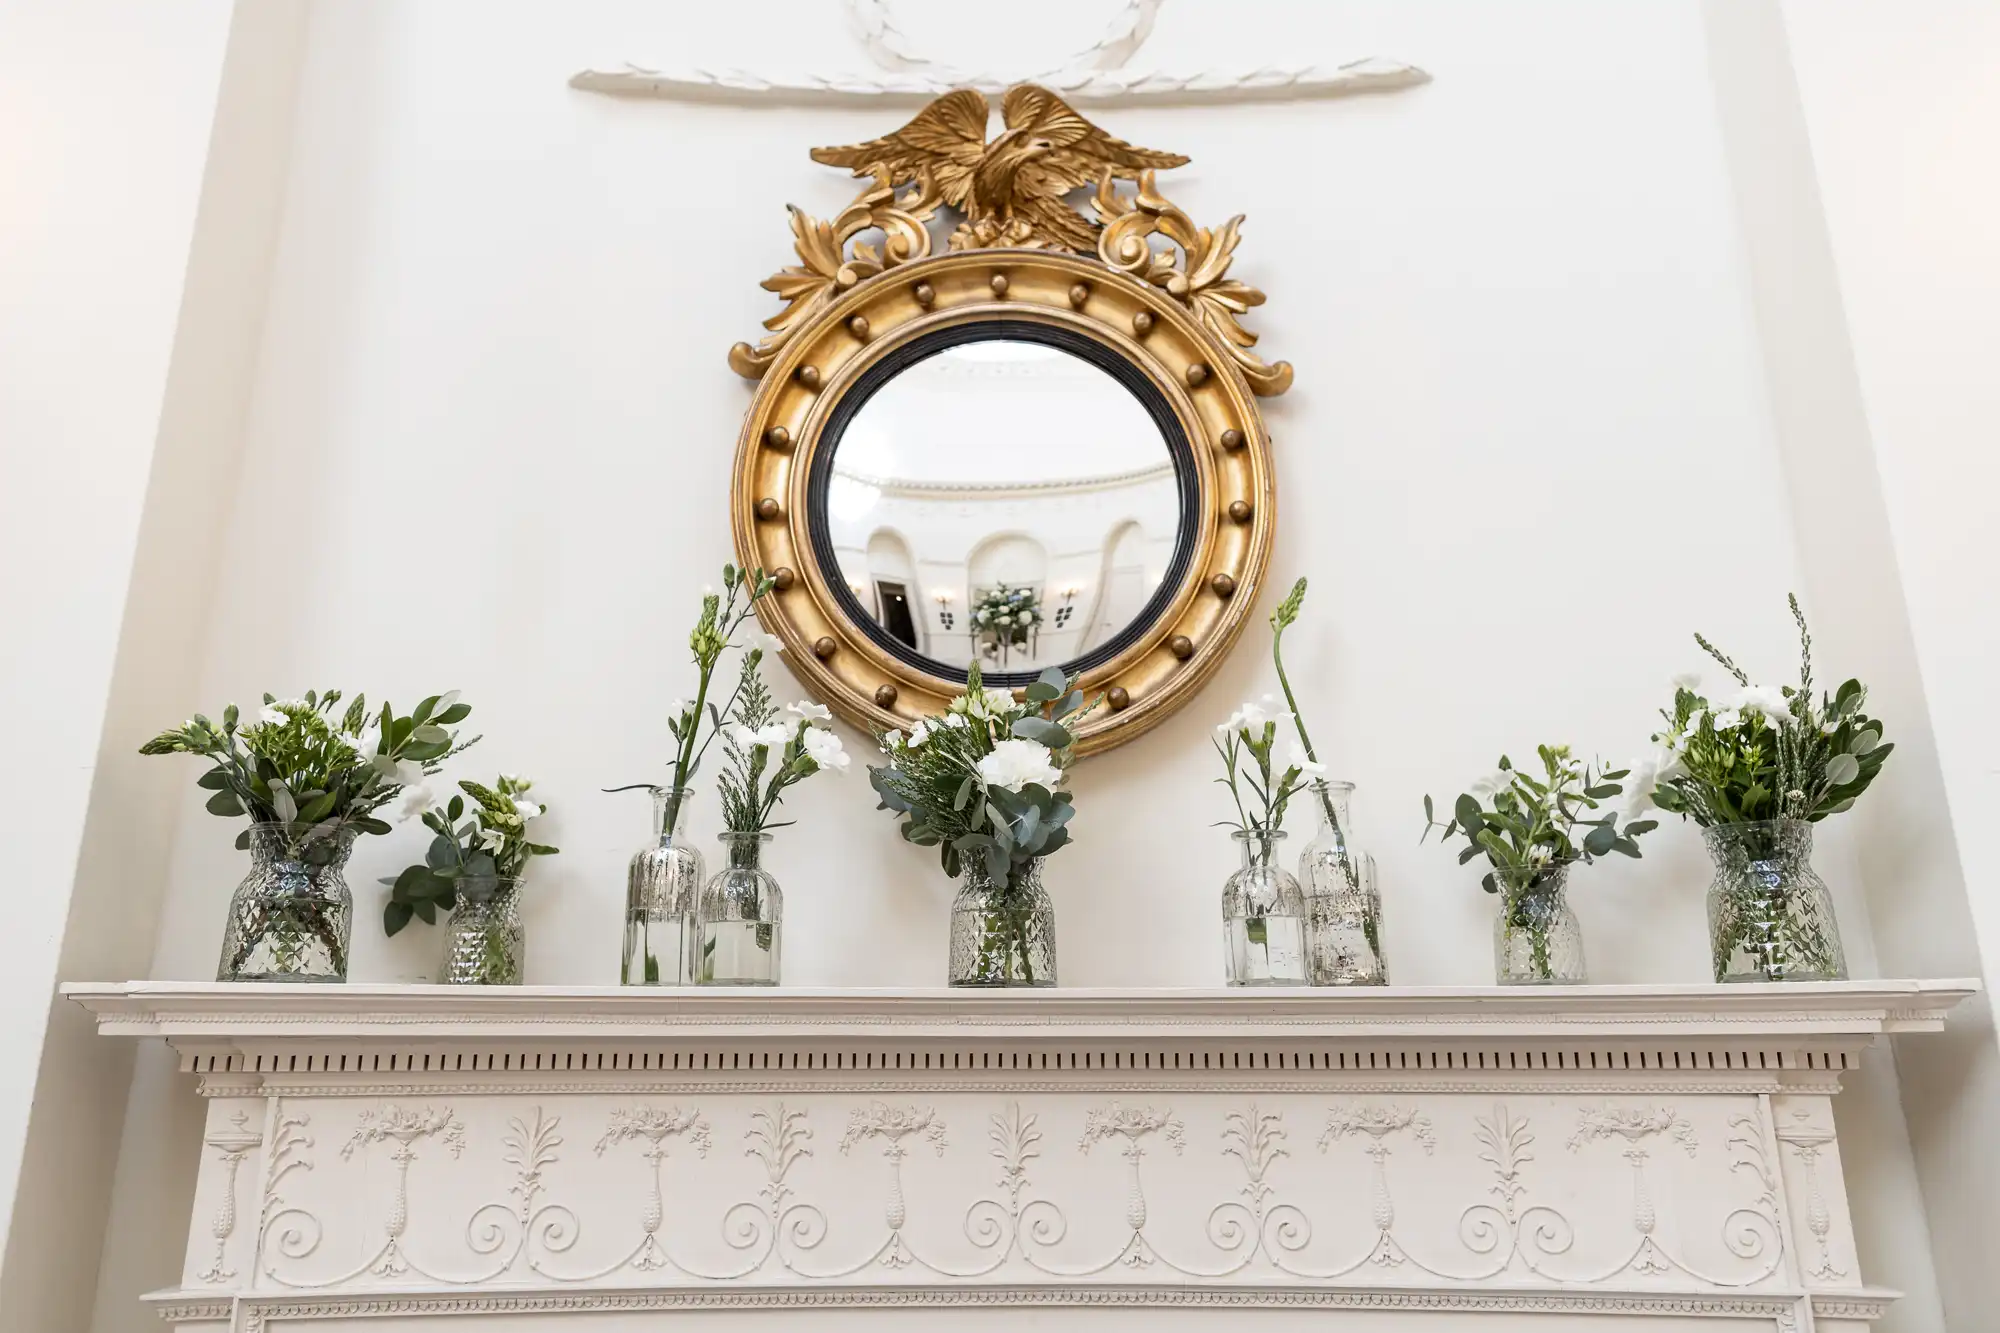 Decorative round gold mirror with an eagle motif, mounted on a white ornate mantelpiece flanked by green plants in glass vases.